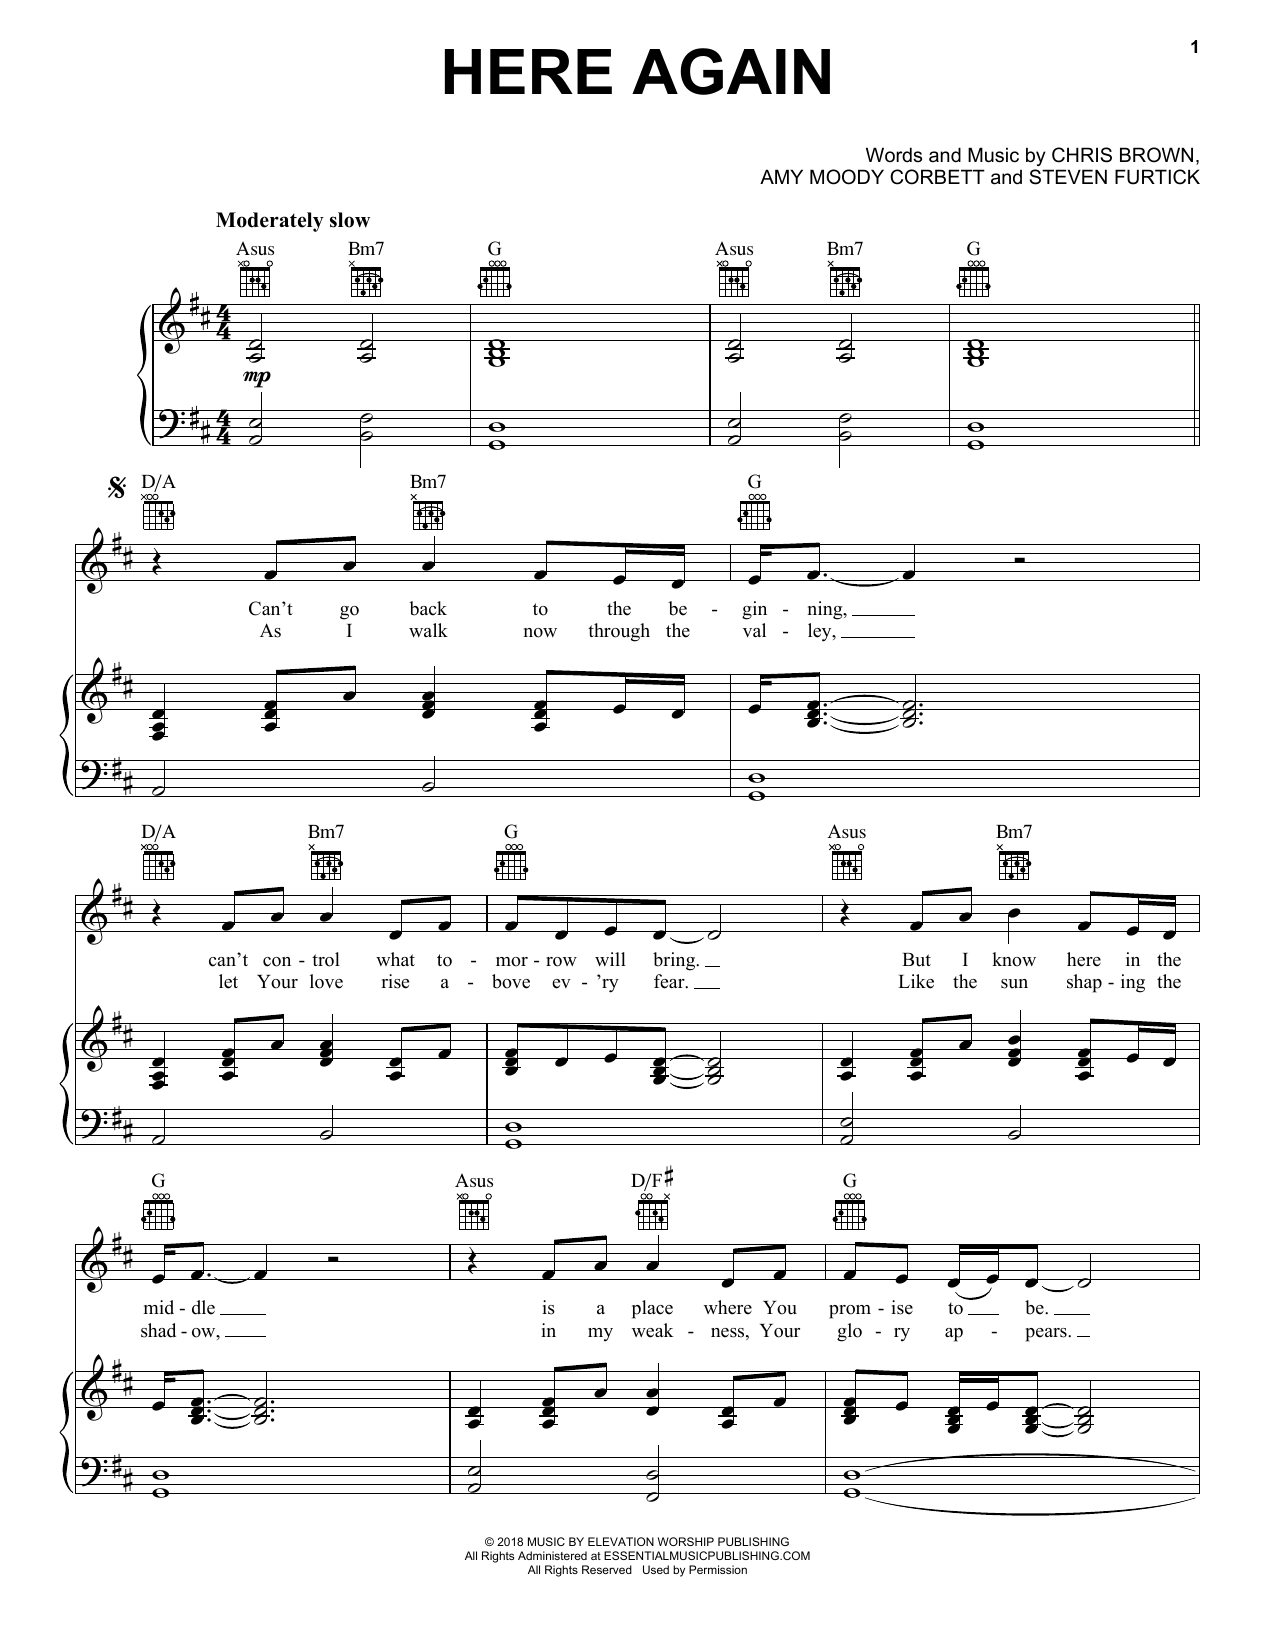 Elevation Worship Here Again sheet music notes and chords. Download Printable PDF.